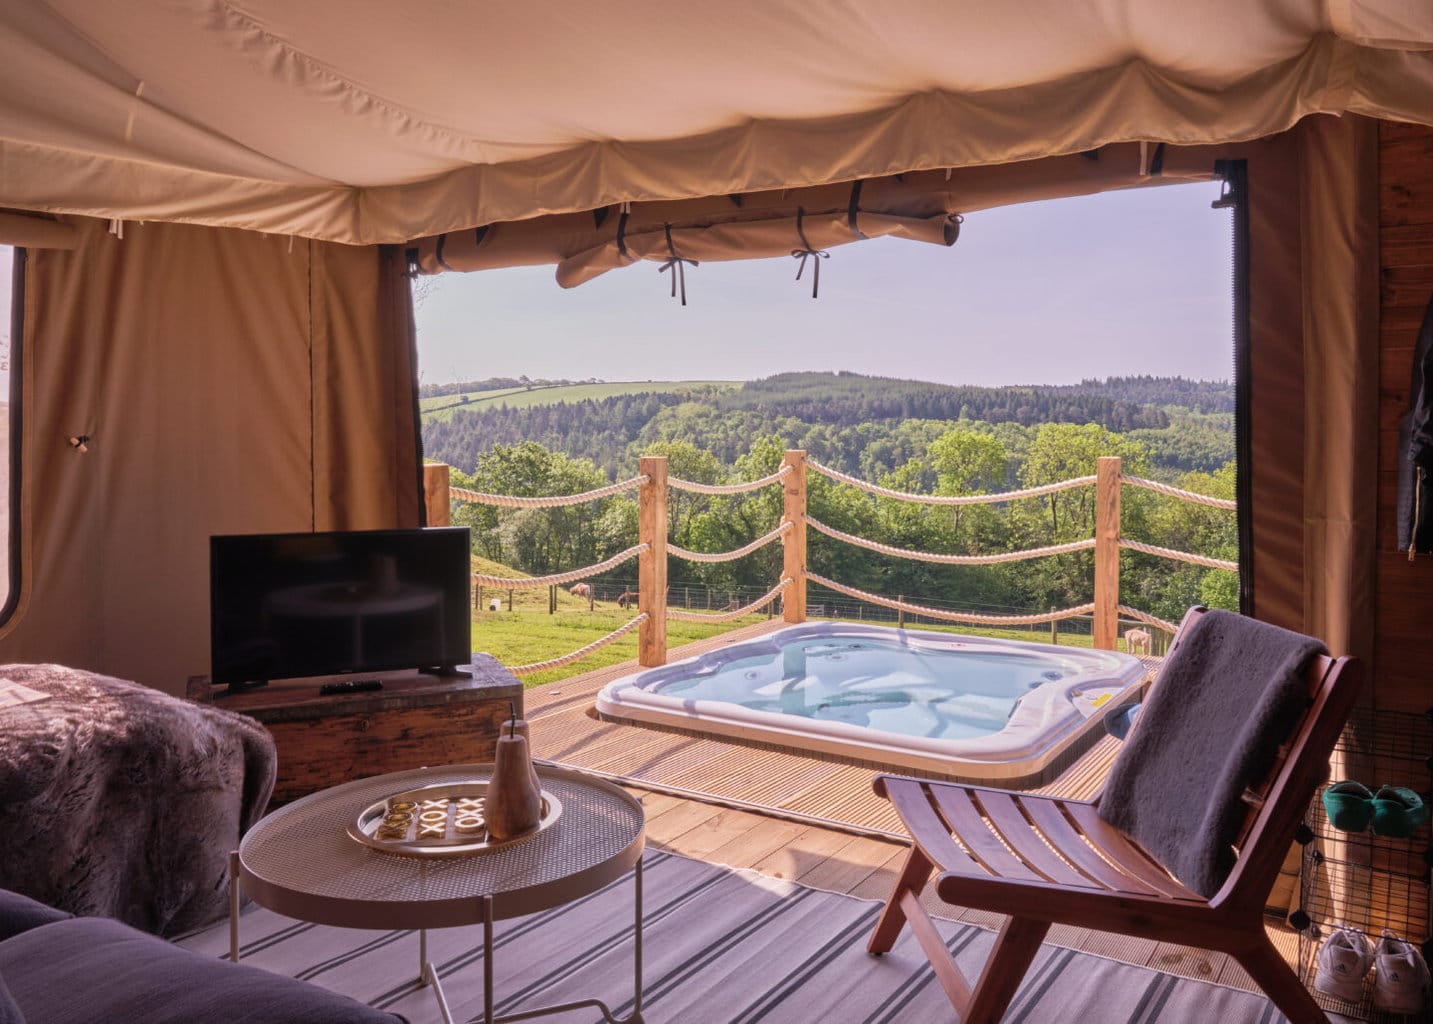 Glamping in Cornwall at Glynn Barton Holiday Cottages